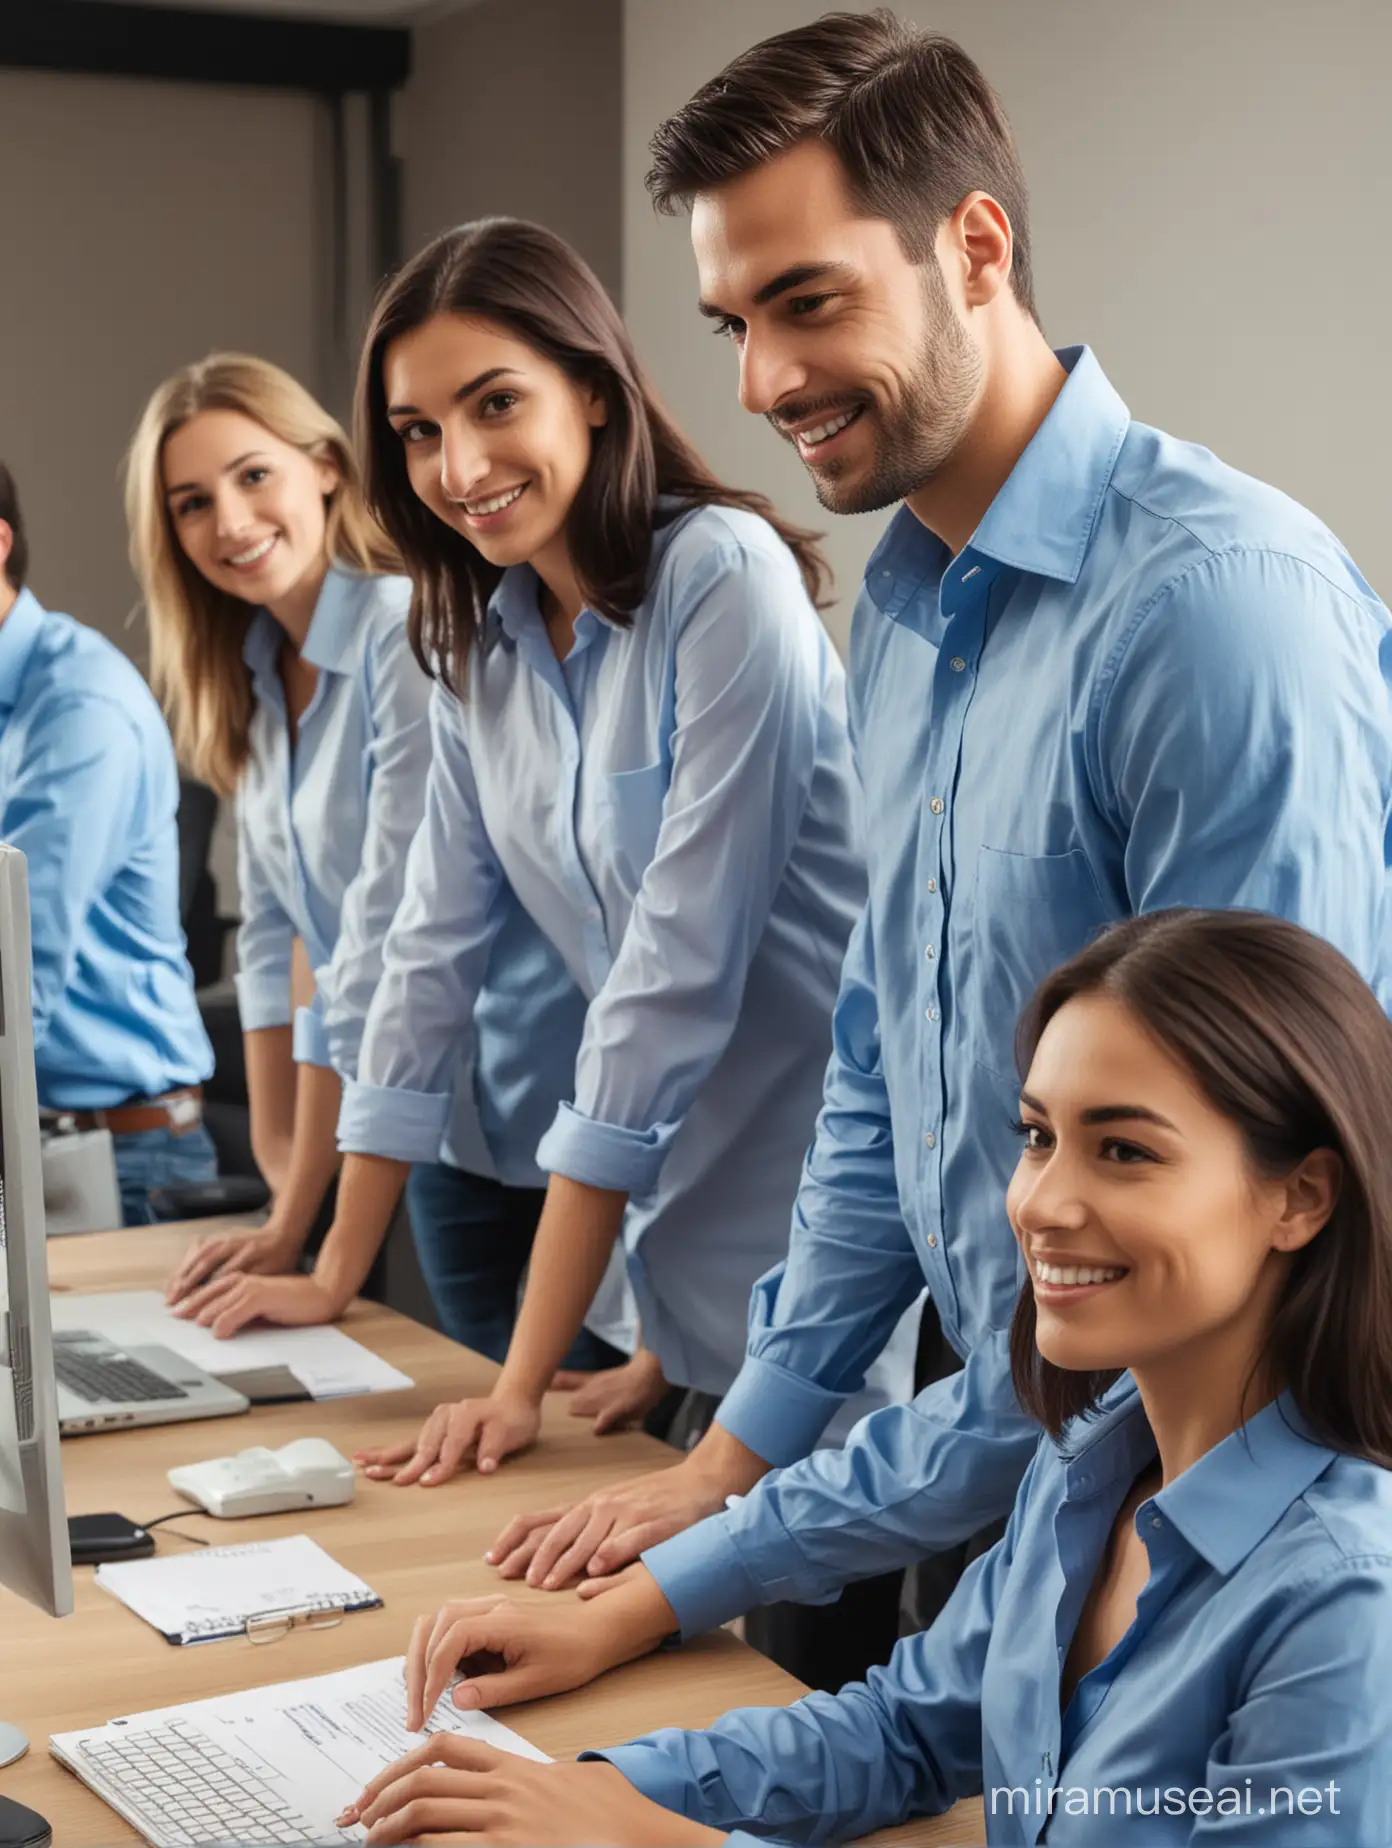 men and women in Outsourcing company working together wearing blue shirt